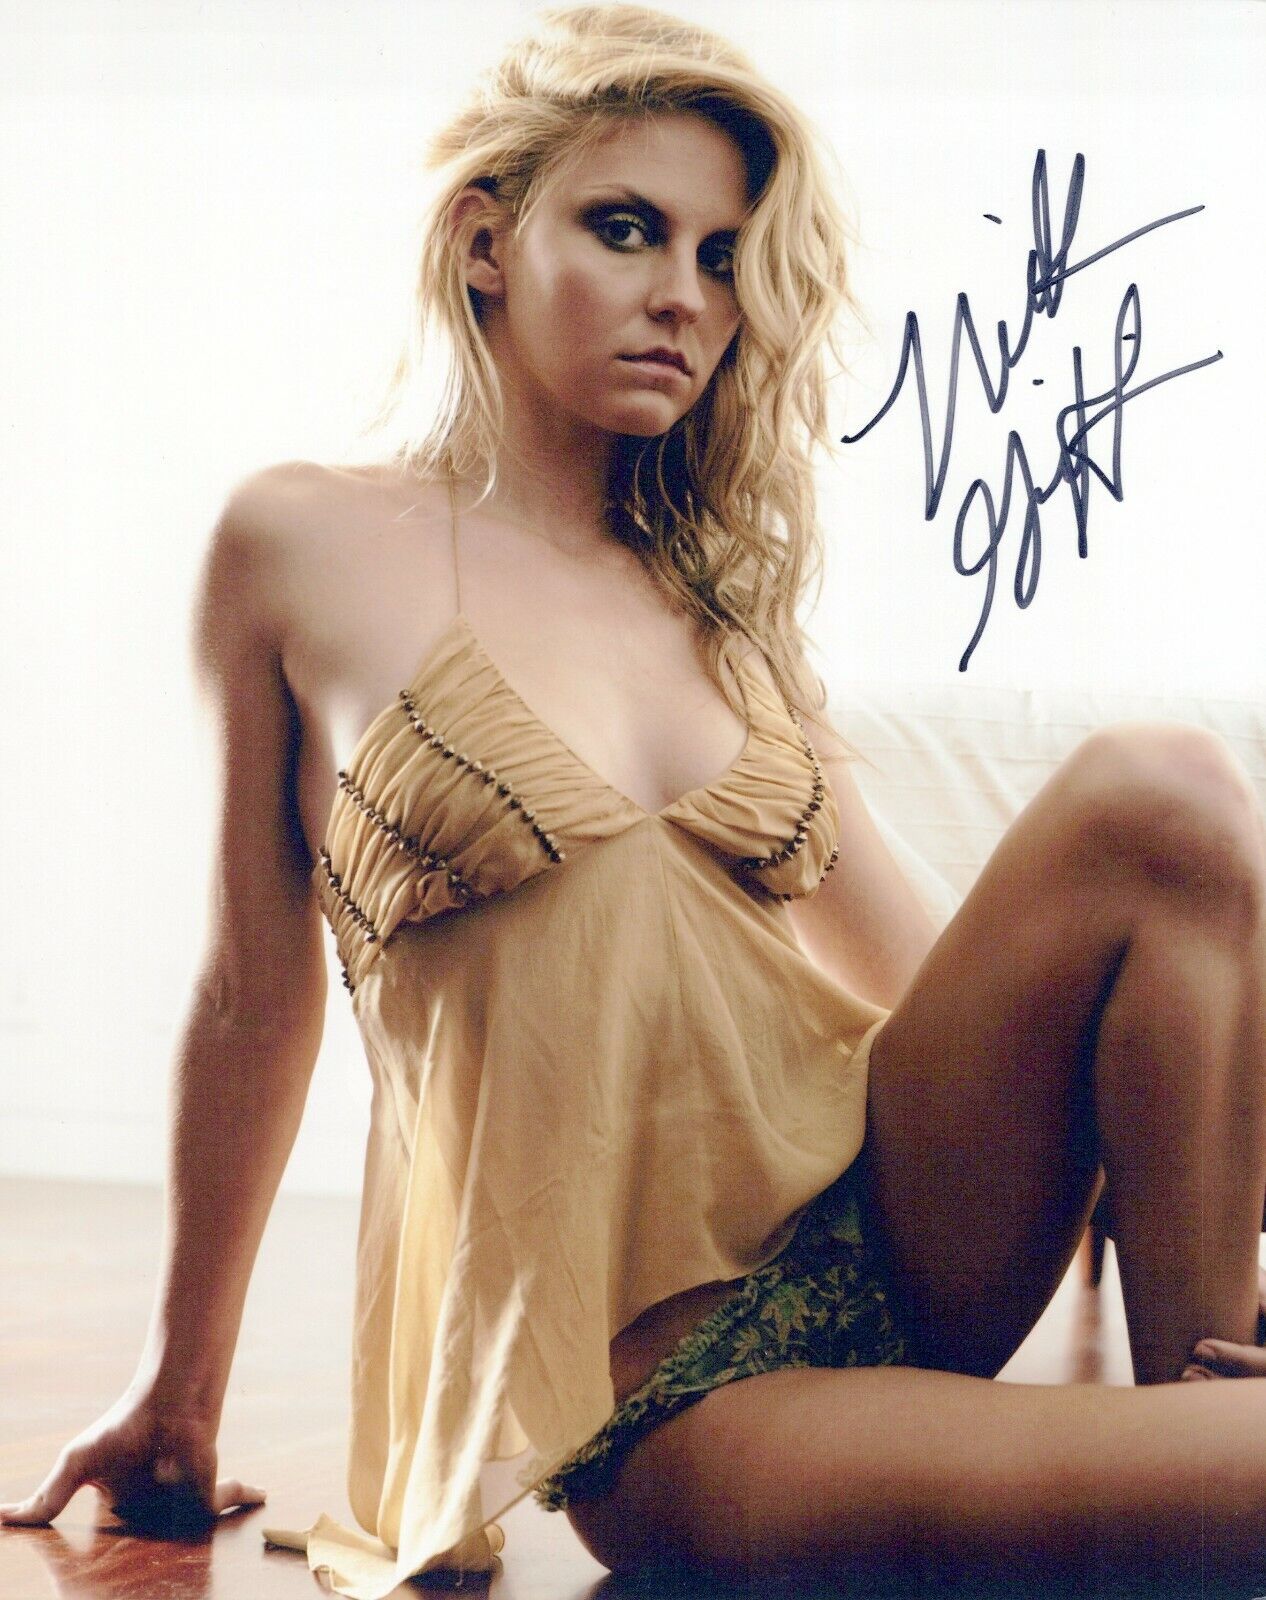 Nikki Griffin glamour shot autographed Photo Poster painting signed 8x10 #6